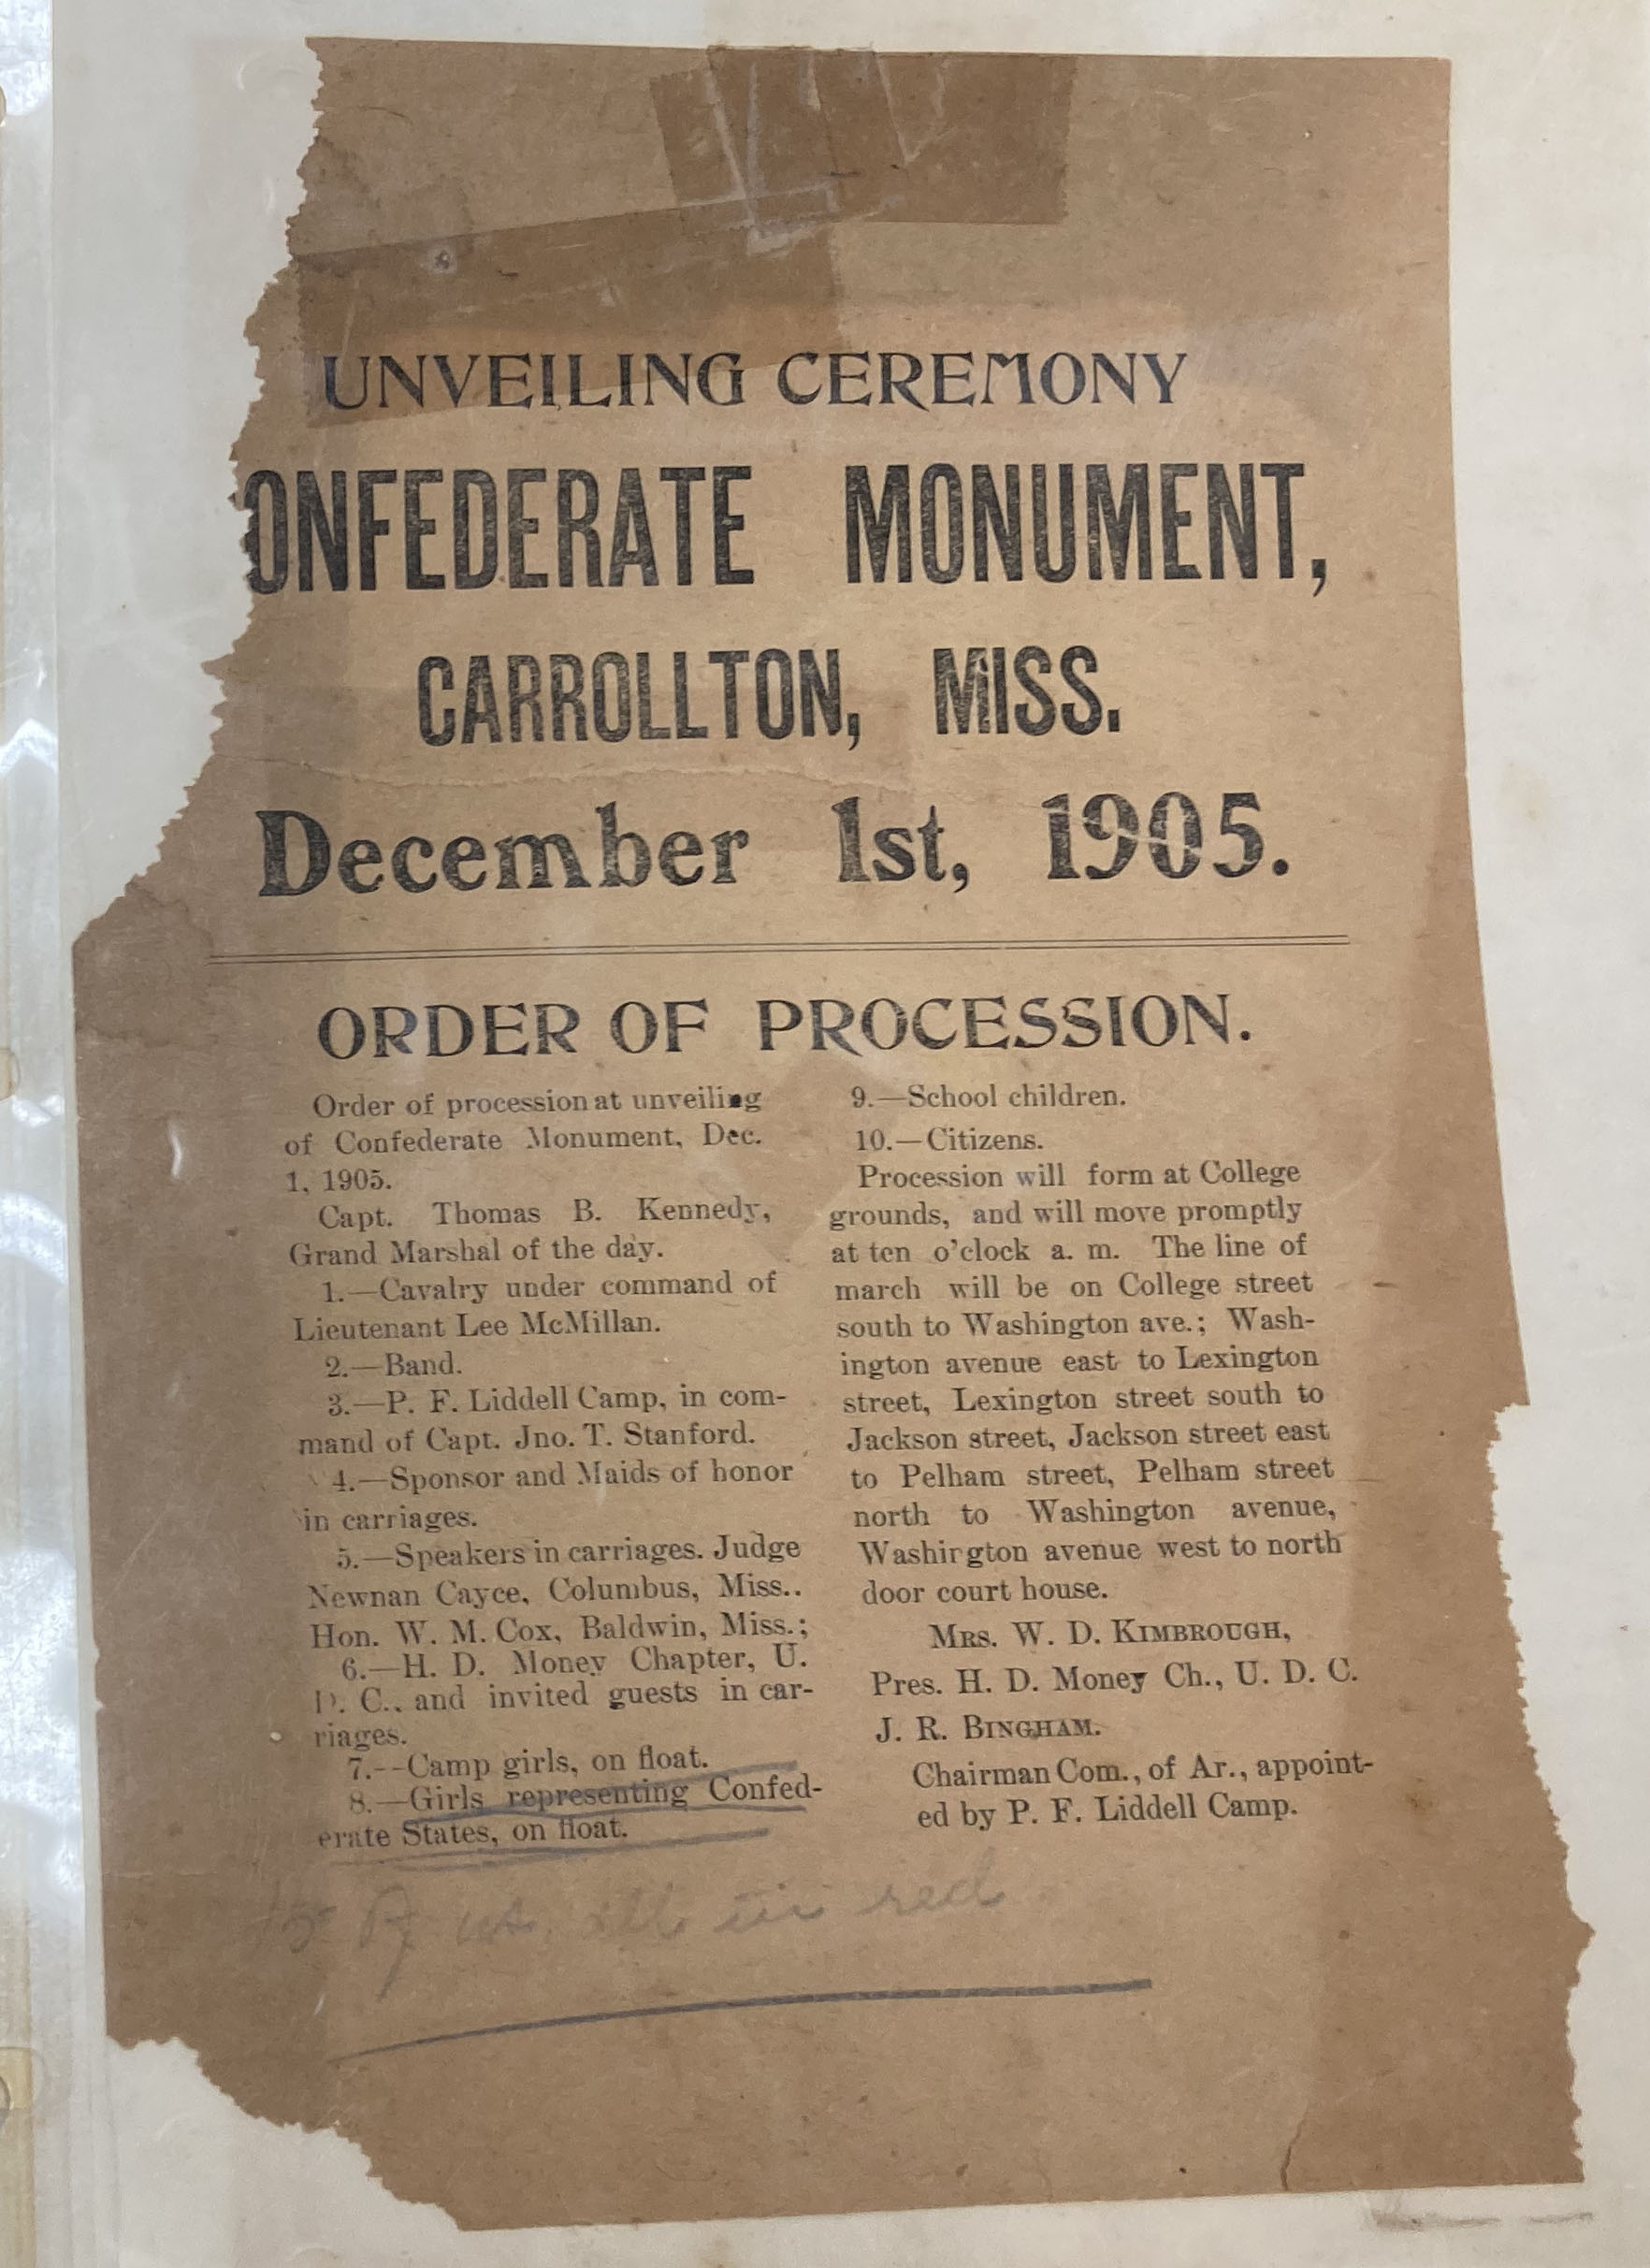 Confederate Monument Dedication flyer from 1905